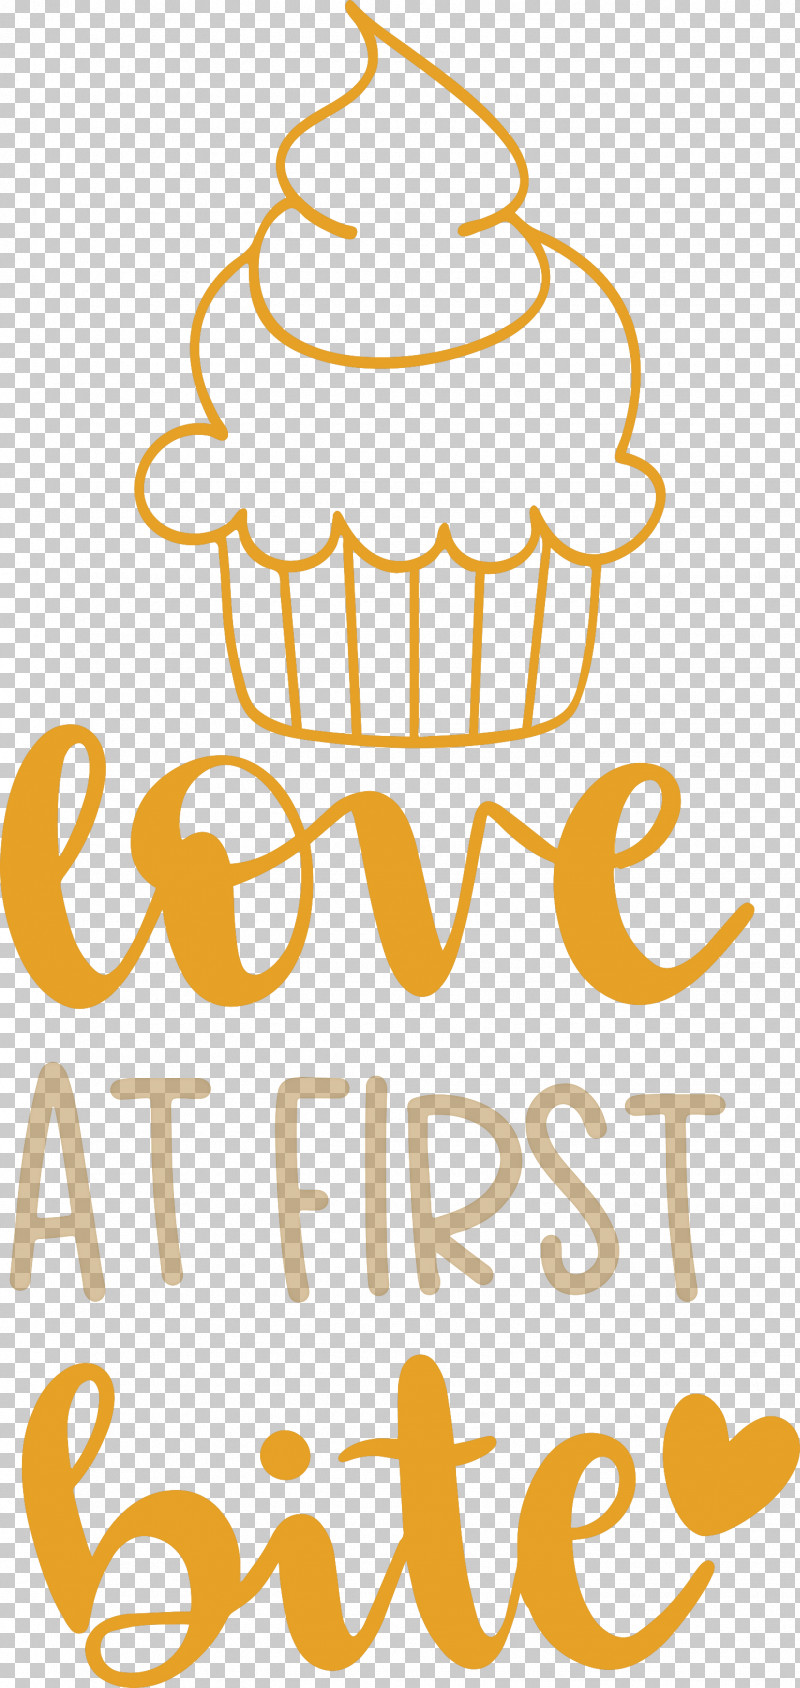 Love At First Bite Cooking Kitchen PNG, Clipart, Cooking, Cupcake, Food, Geometry, Happiness Free PNG Download